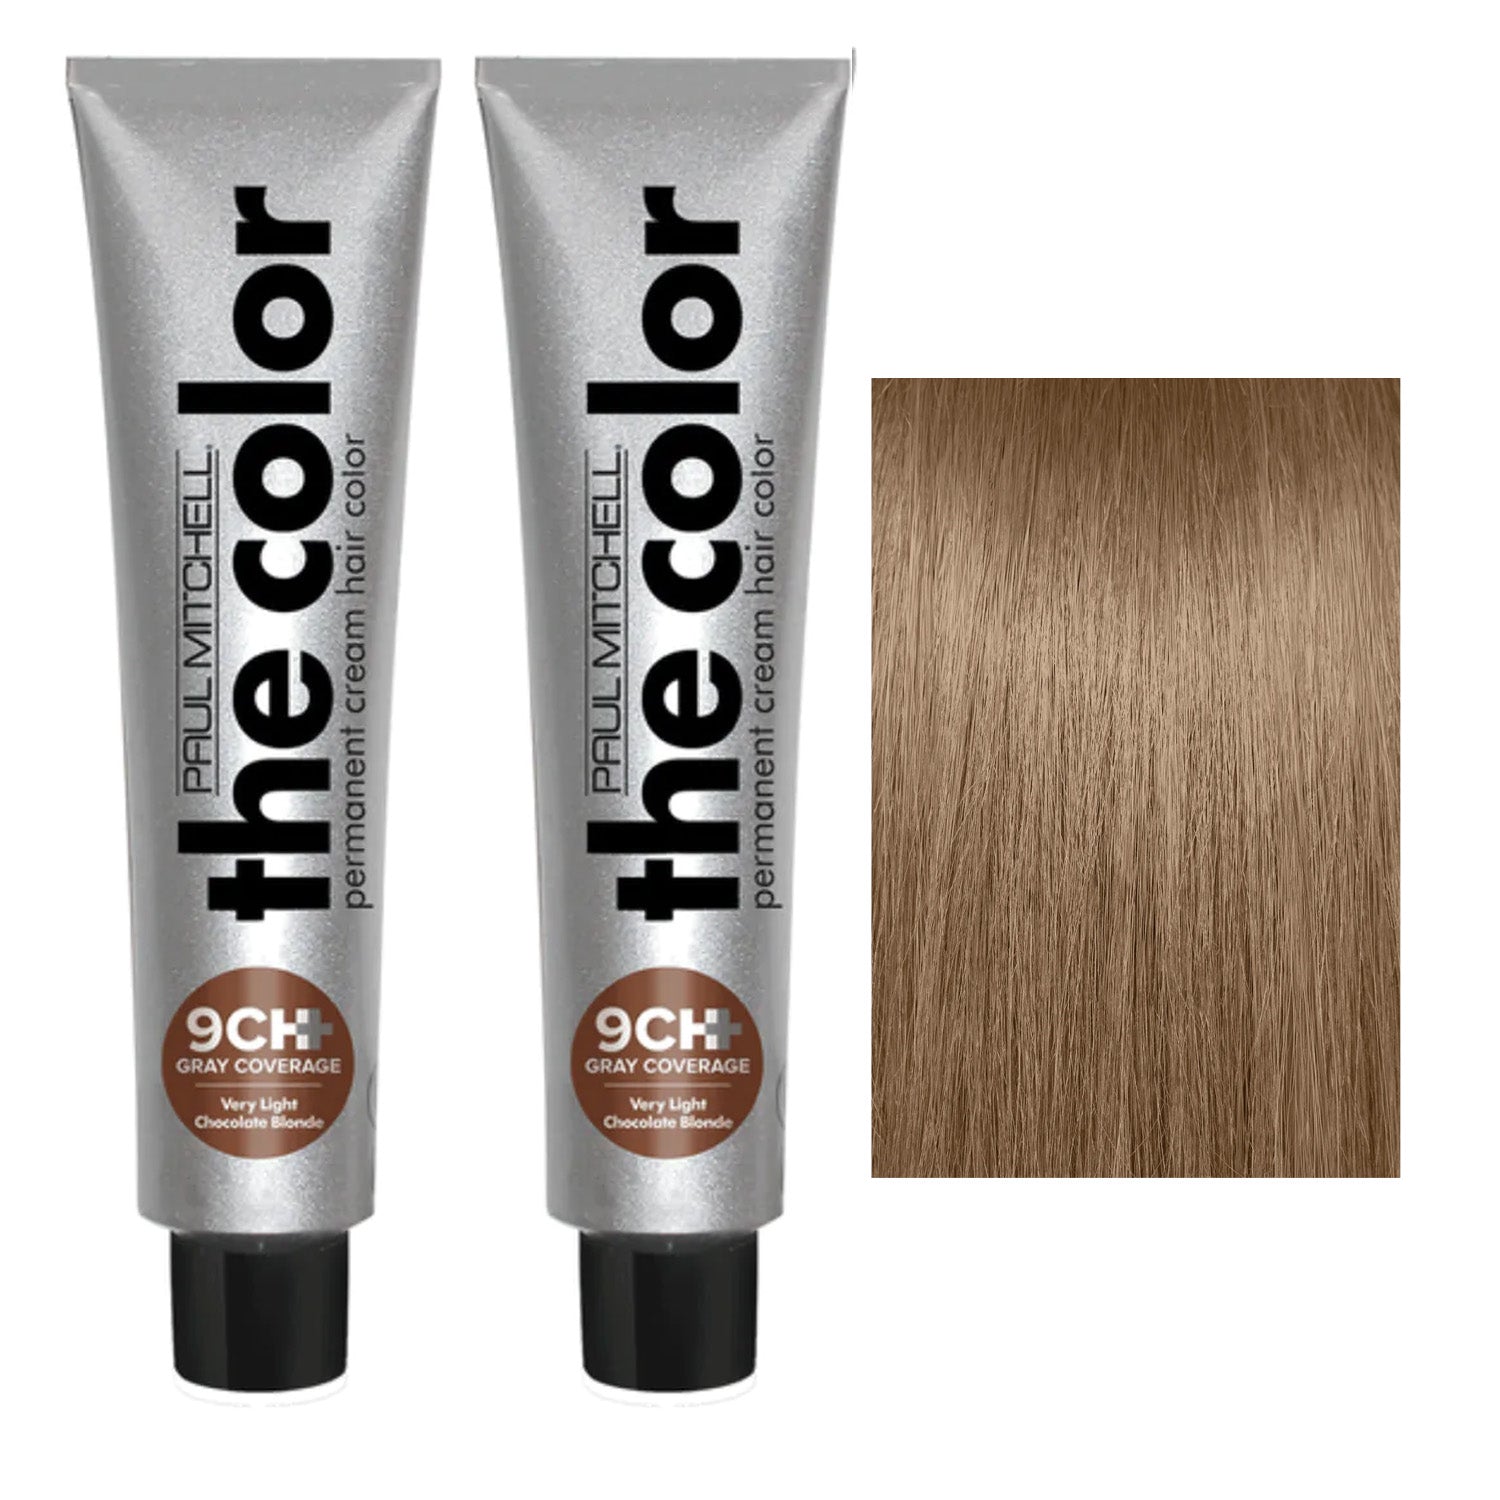 PAUL MITCHELL THE COLOR GRAY COVERAGE CHOCOLATE PLUS 9CH VERY LIGHT CHOCOLATE BLONDE 3OZ